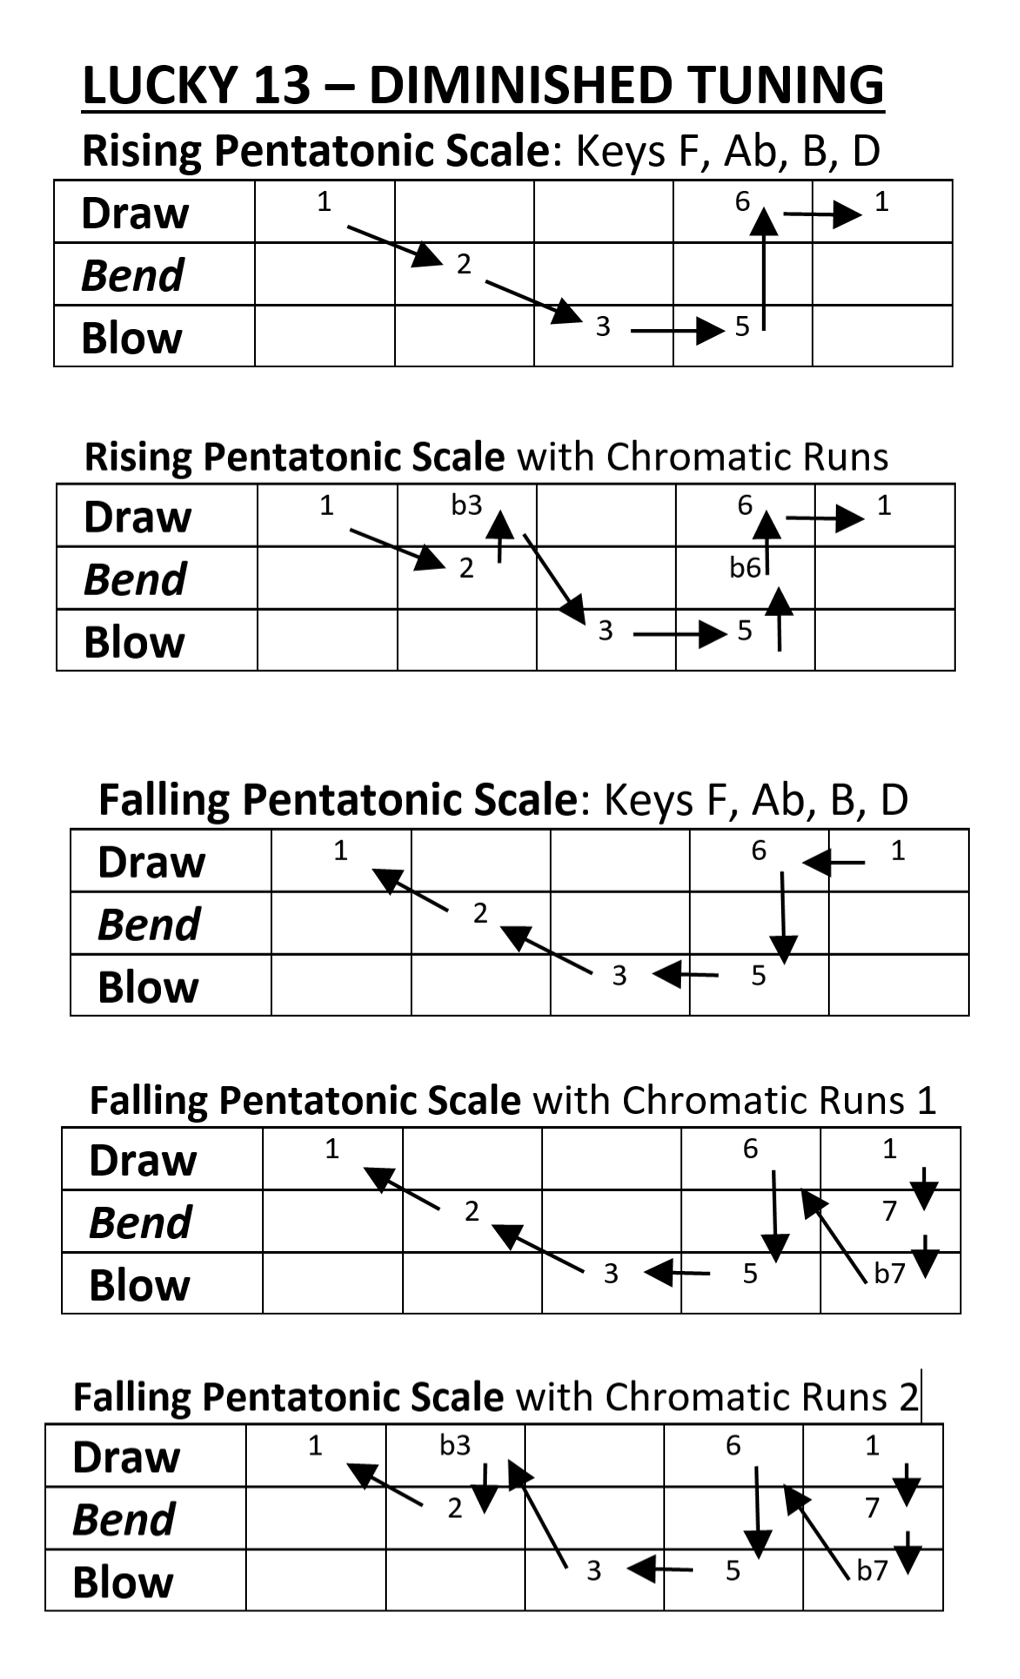 Lucky 13 Diminished Tuning - Pentatonic Scales with Chromatic Runs.png